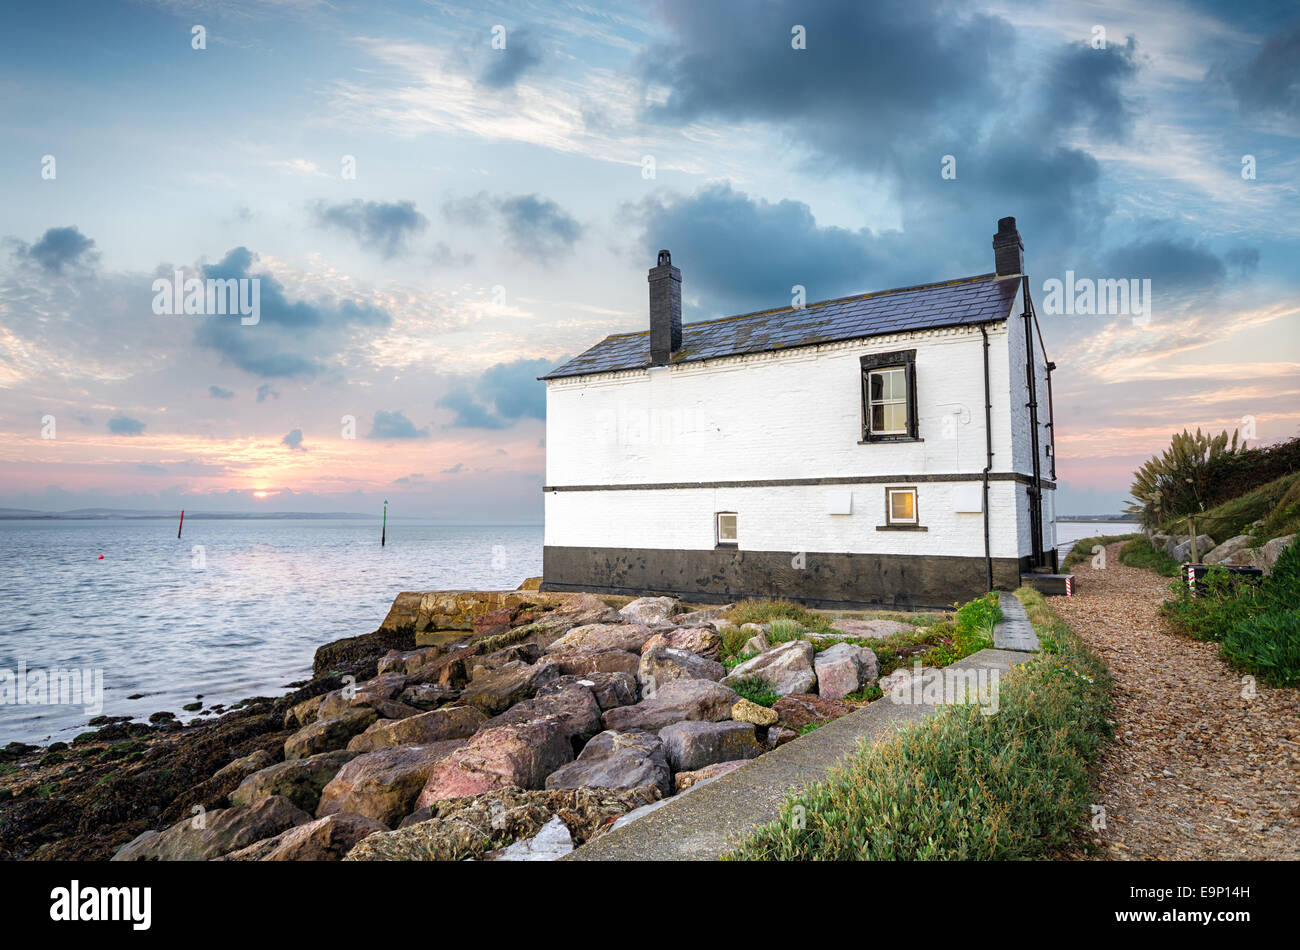 Sunrise over a cottage on the beach Stock Photo